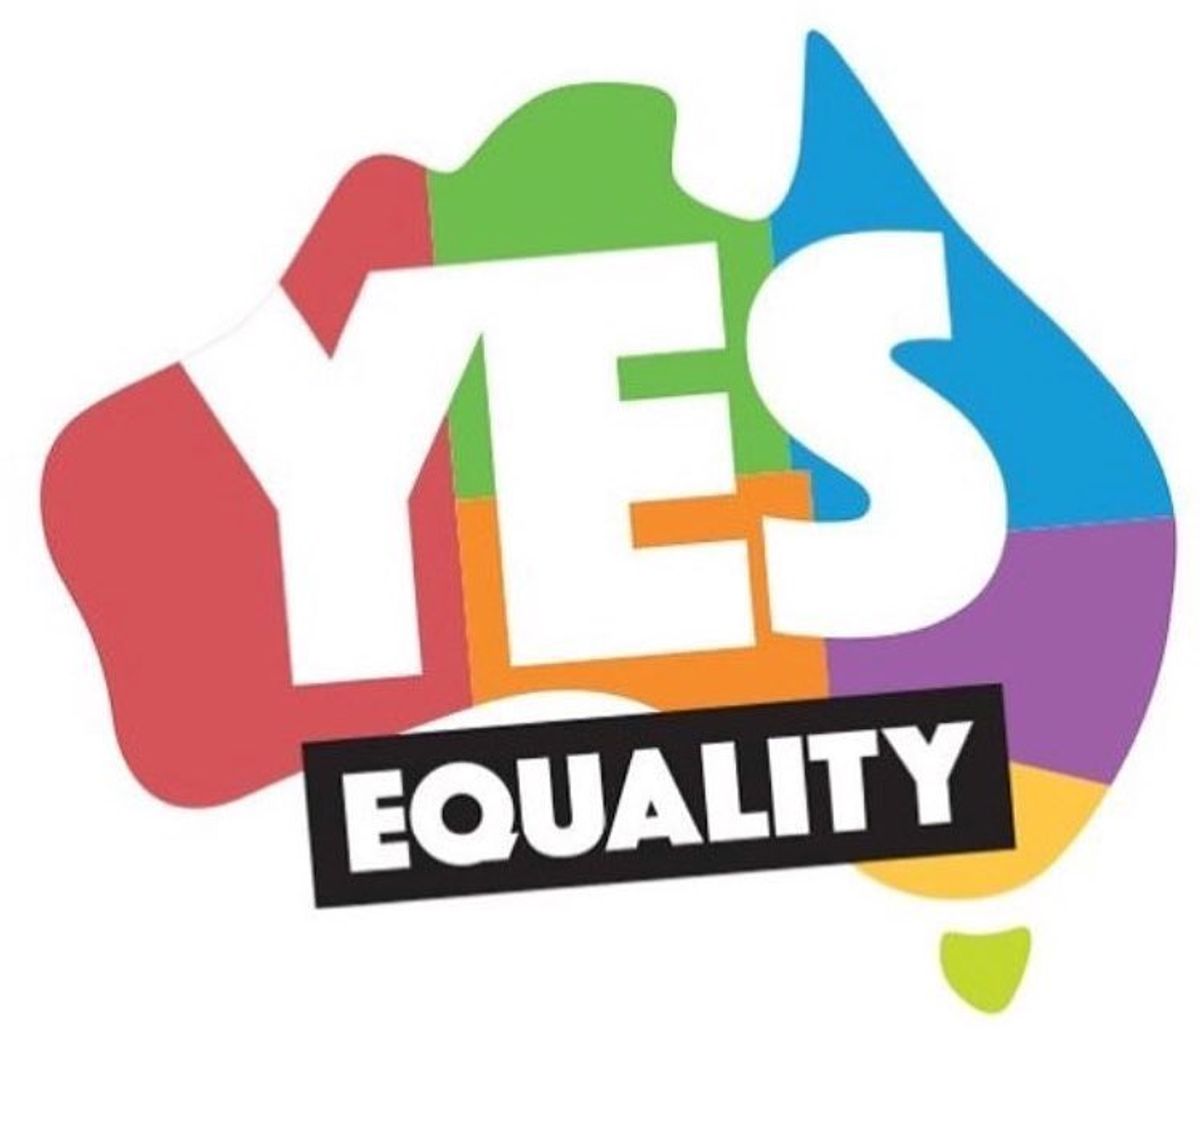 On Being In Australia For The "Yes" Vote